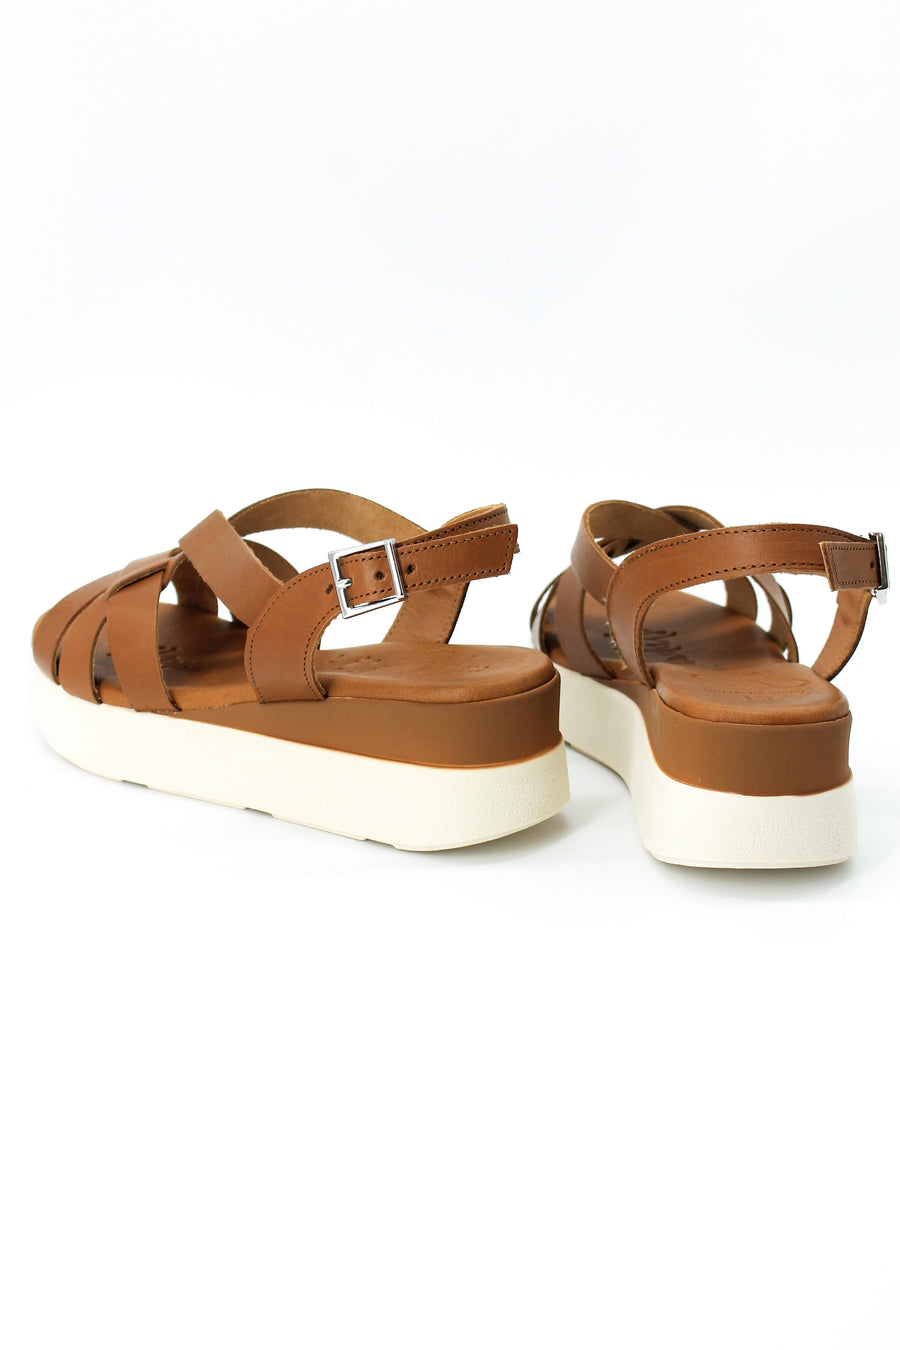 Oh My Sandals 5188 Tan